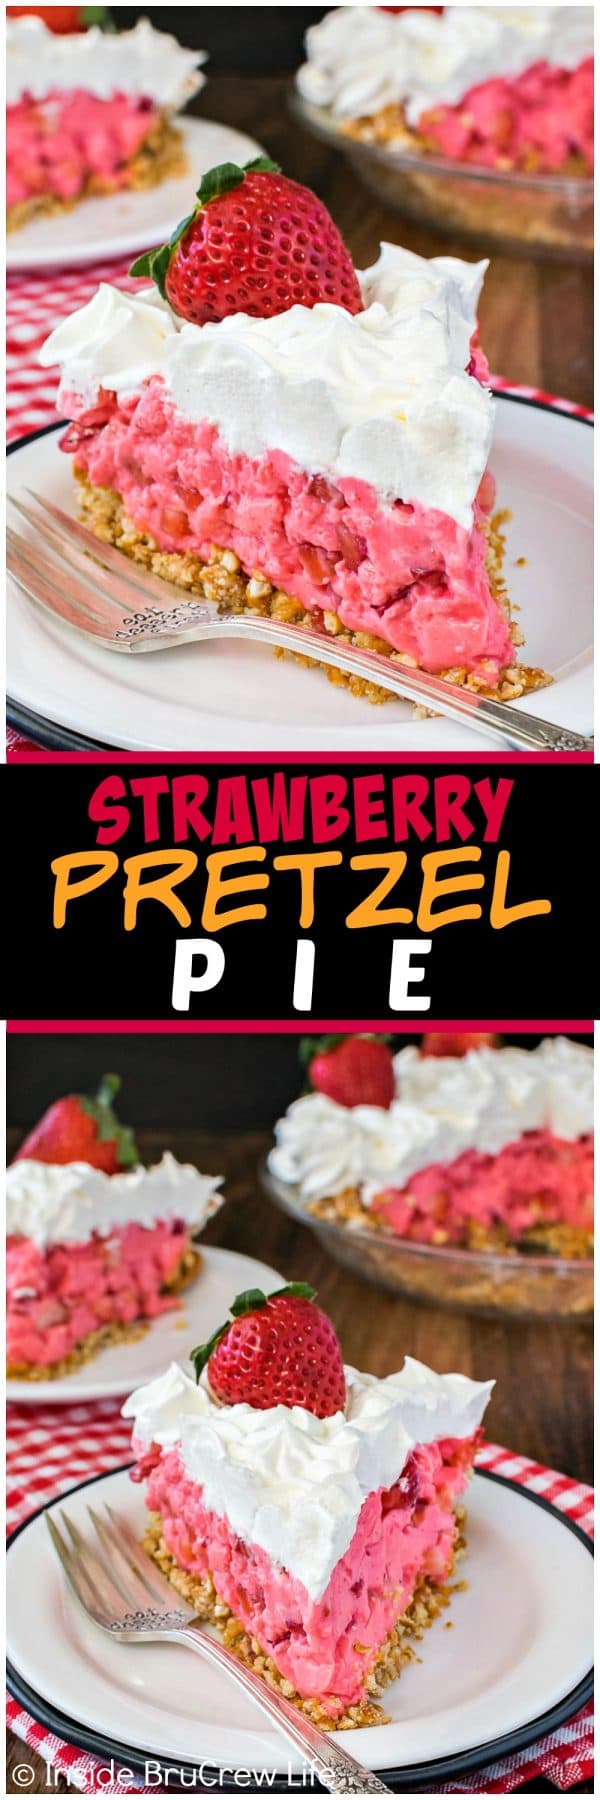 Strawberry Pretzel Pie - a sweet and salty crust and a creamy strawberry filling makes this easy no bake pie recipe a fun spring or summer dessert!!